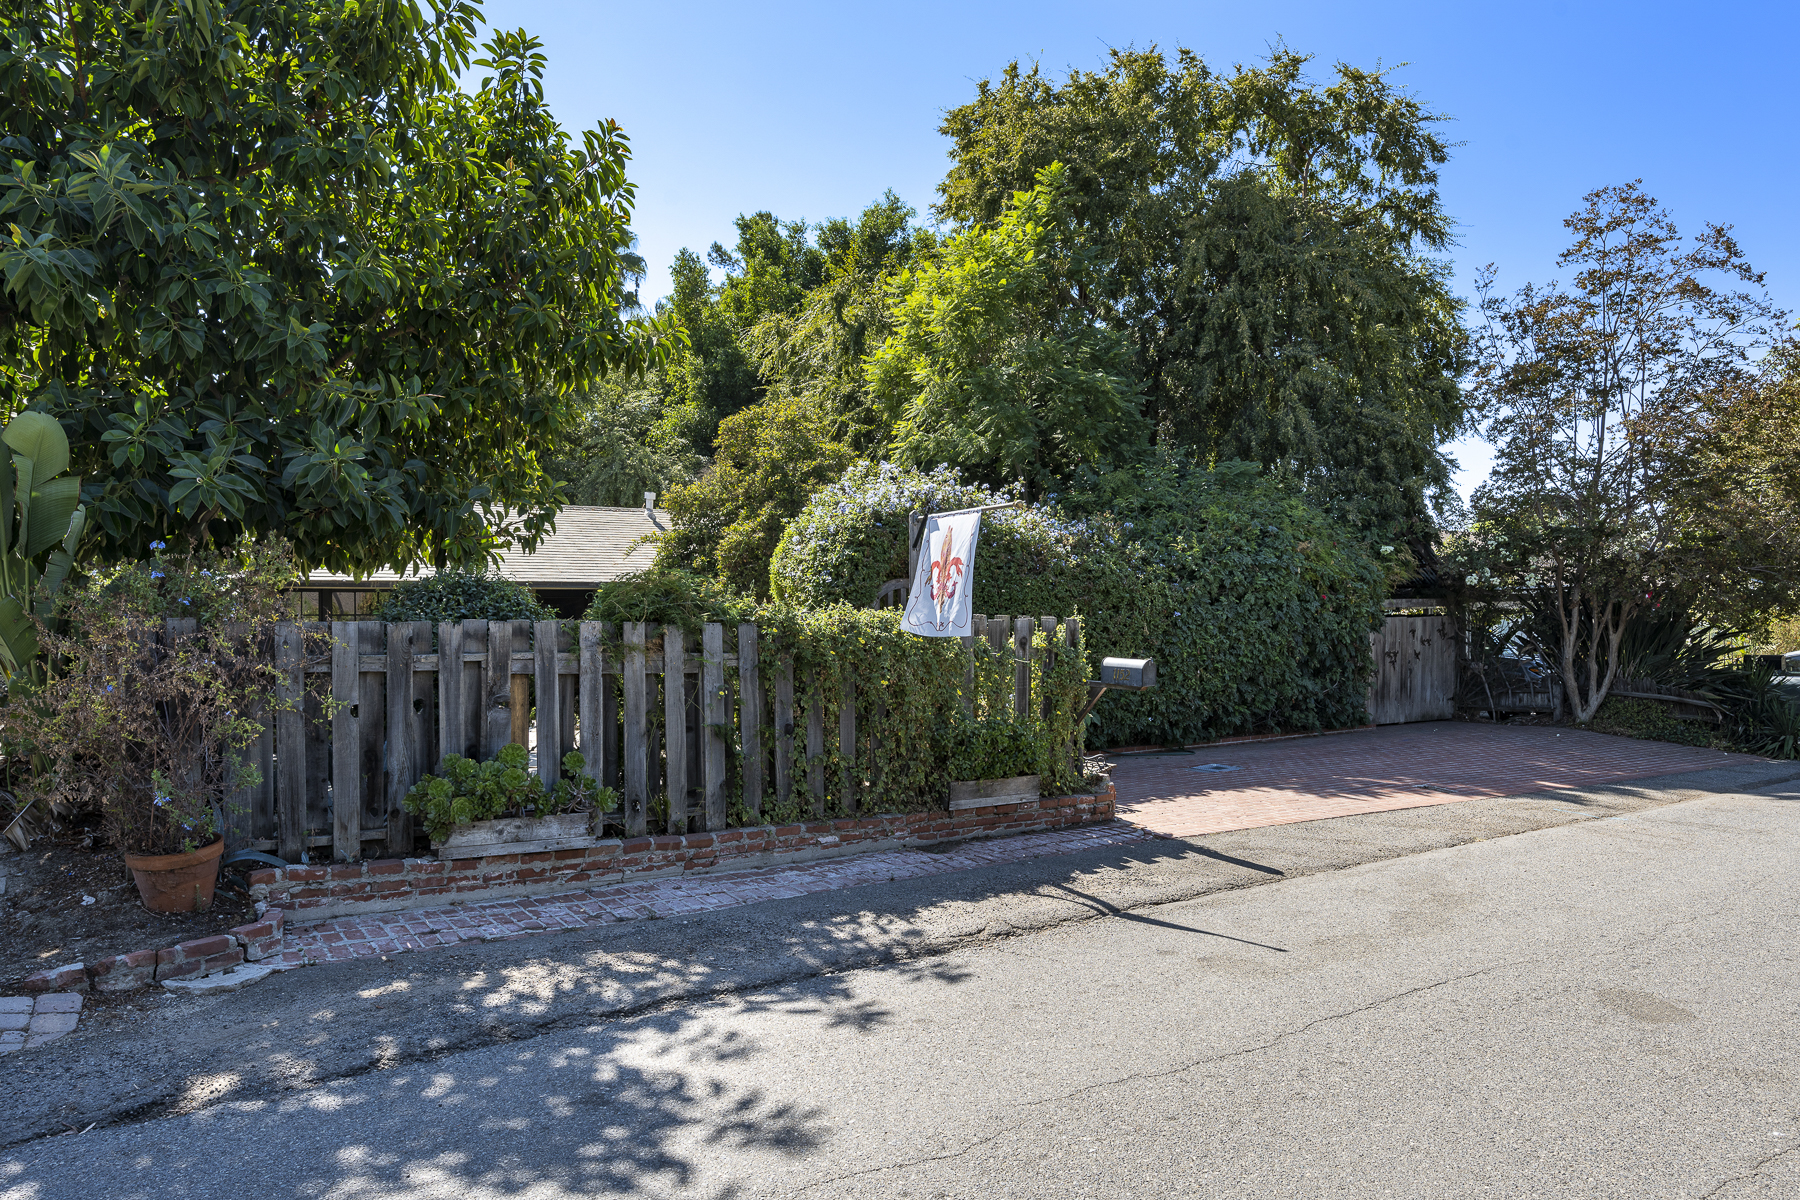 1152 W. Valley View Drive, Fullerton, CA 92833